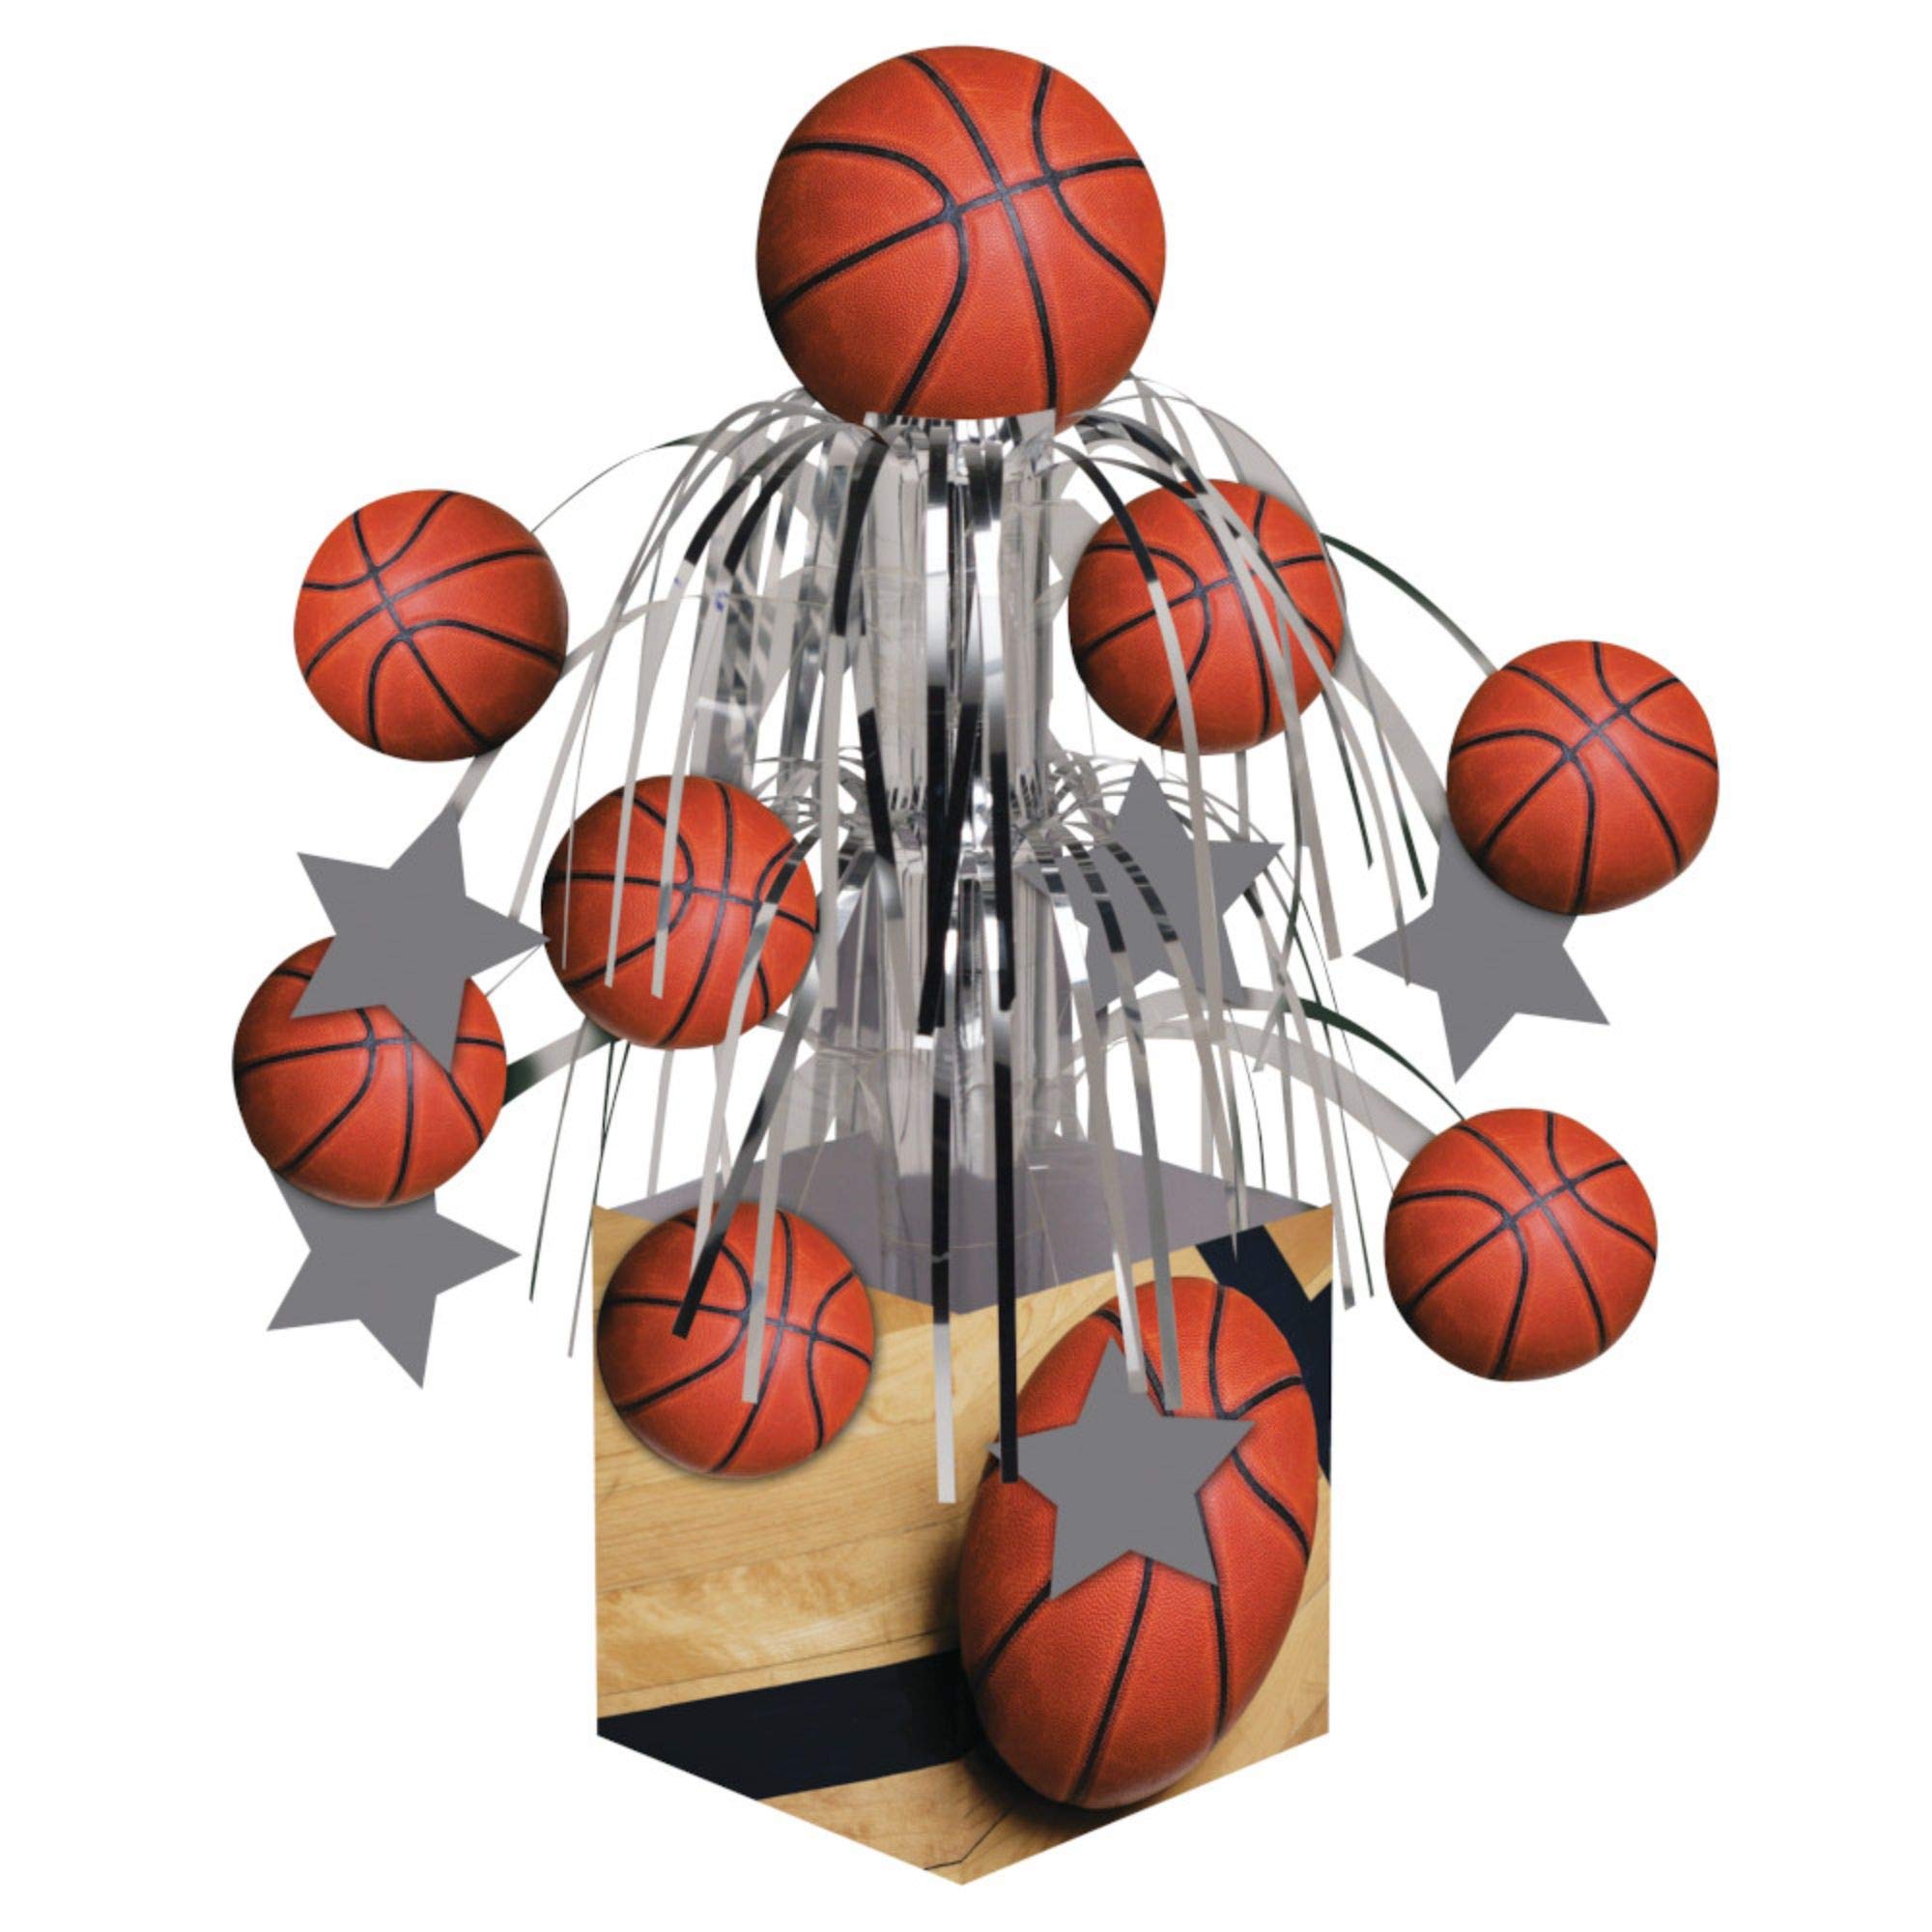 Pack of 6 Sports Fanatic Basketball Mini Cascade Foil Tabletop Centerpiece Party Decorations 8.5